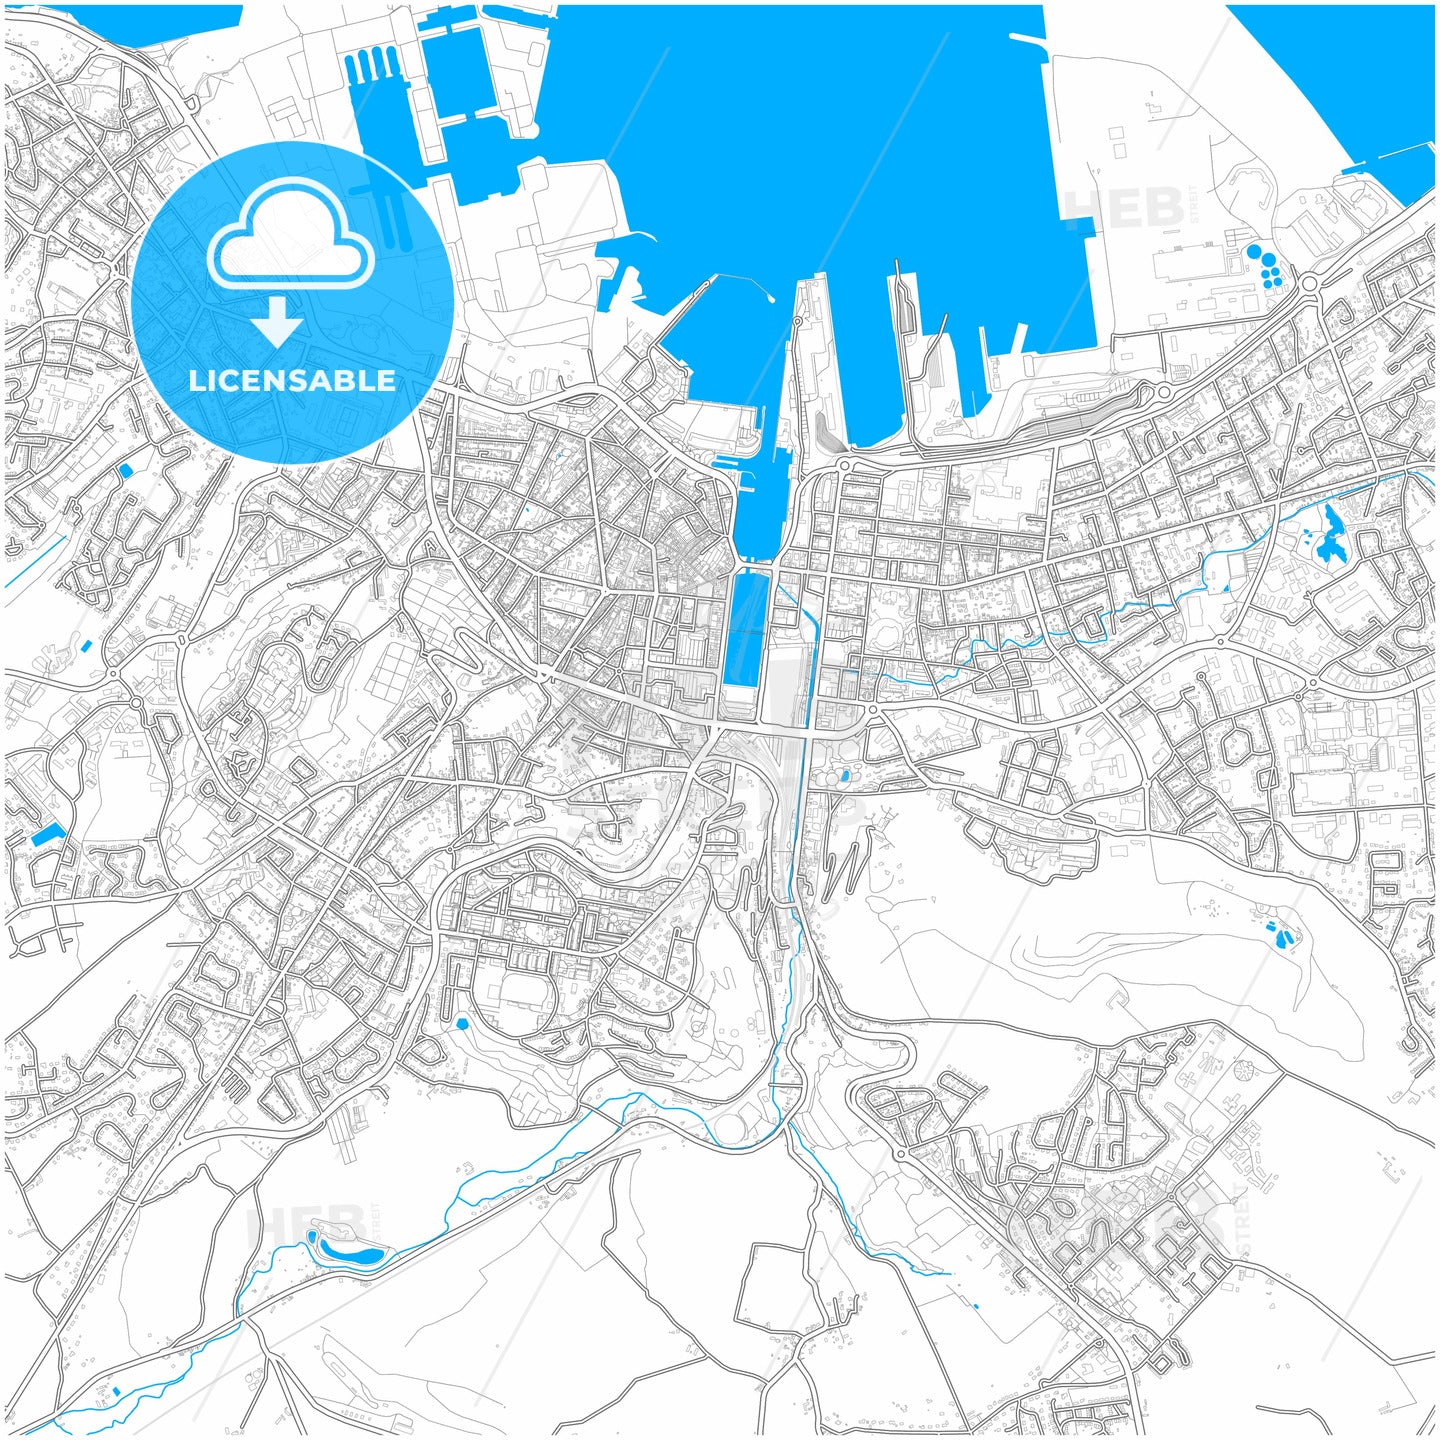 Cherbourg-Octeville, Manche, France, city map with high quality roads.